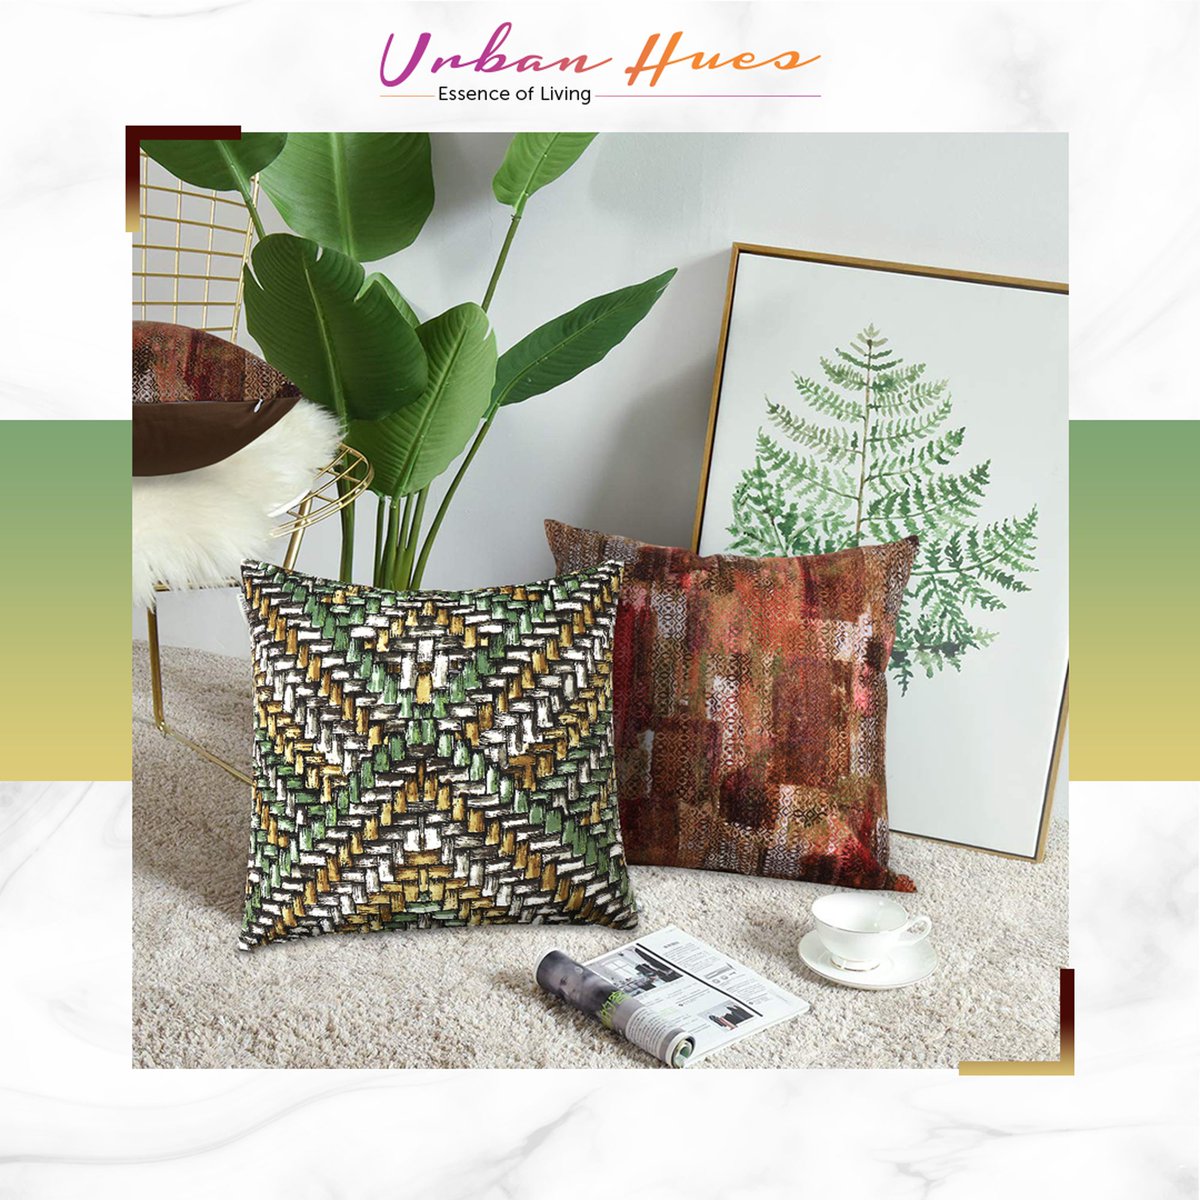 Pep Up Your Interiors With The Exuberant And Tireless Cushion Covers By Urban Hues!
#cushionlove #smoothfabric #interiordesign #homedecoration #homegoal  #colourfulpatterns #softfurnishings #Lifestyle #LivingRoom

Buy Now: amzn.to/2Fq0KLg